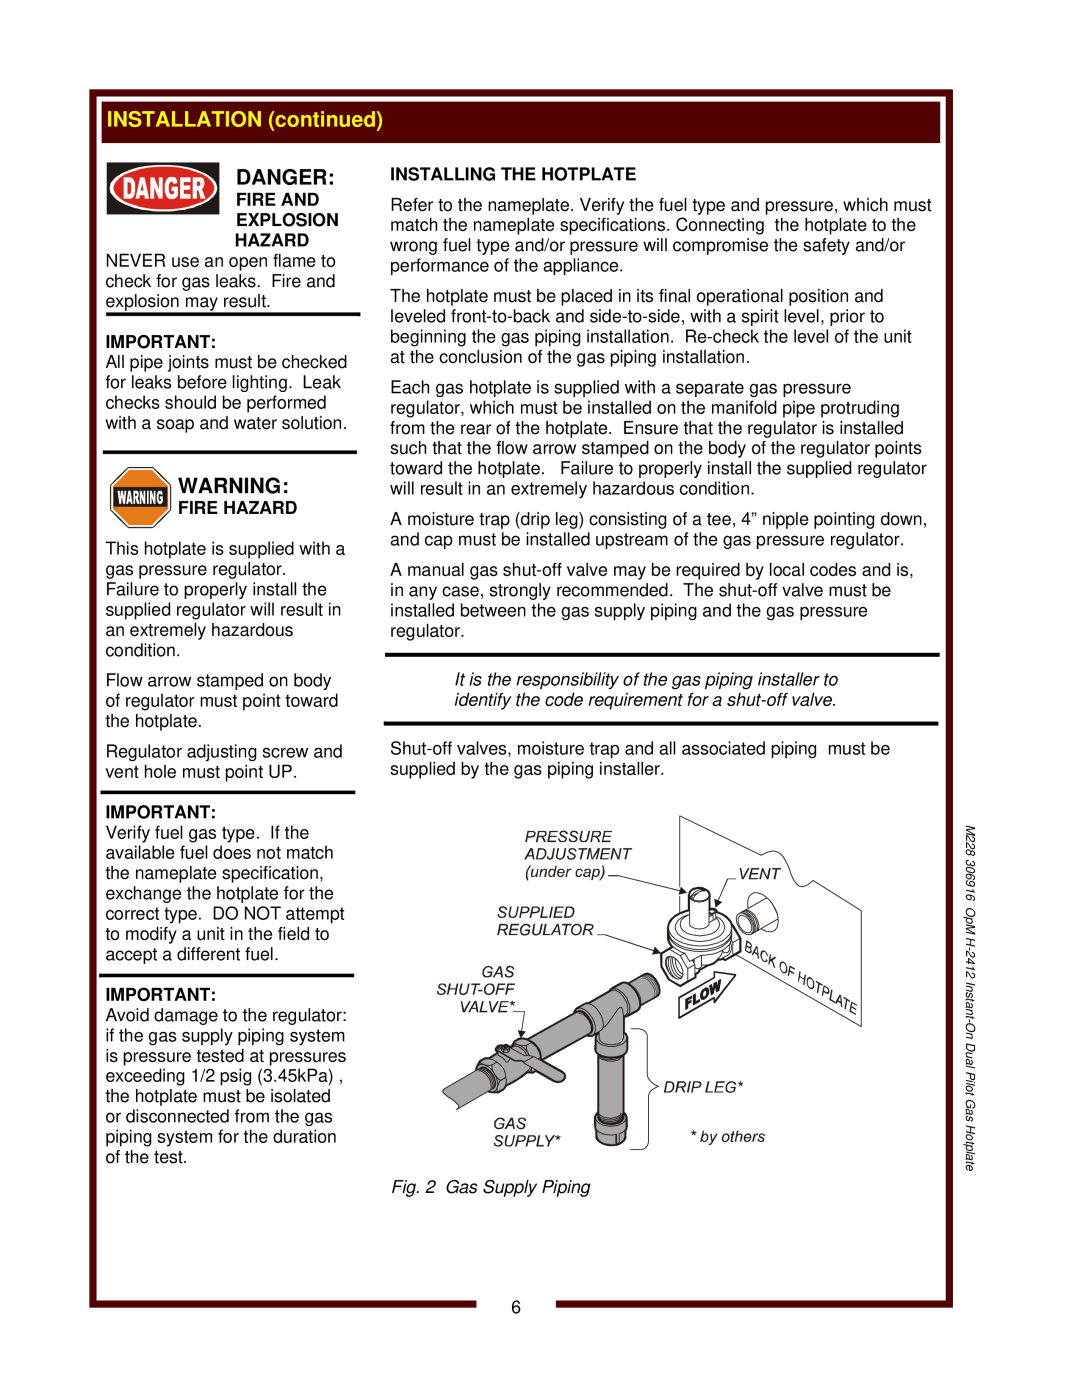 Wells H-2412G operation manual Danger, Fire And Explosion Hazard, Fire Hazard, Gas Supply Piping 